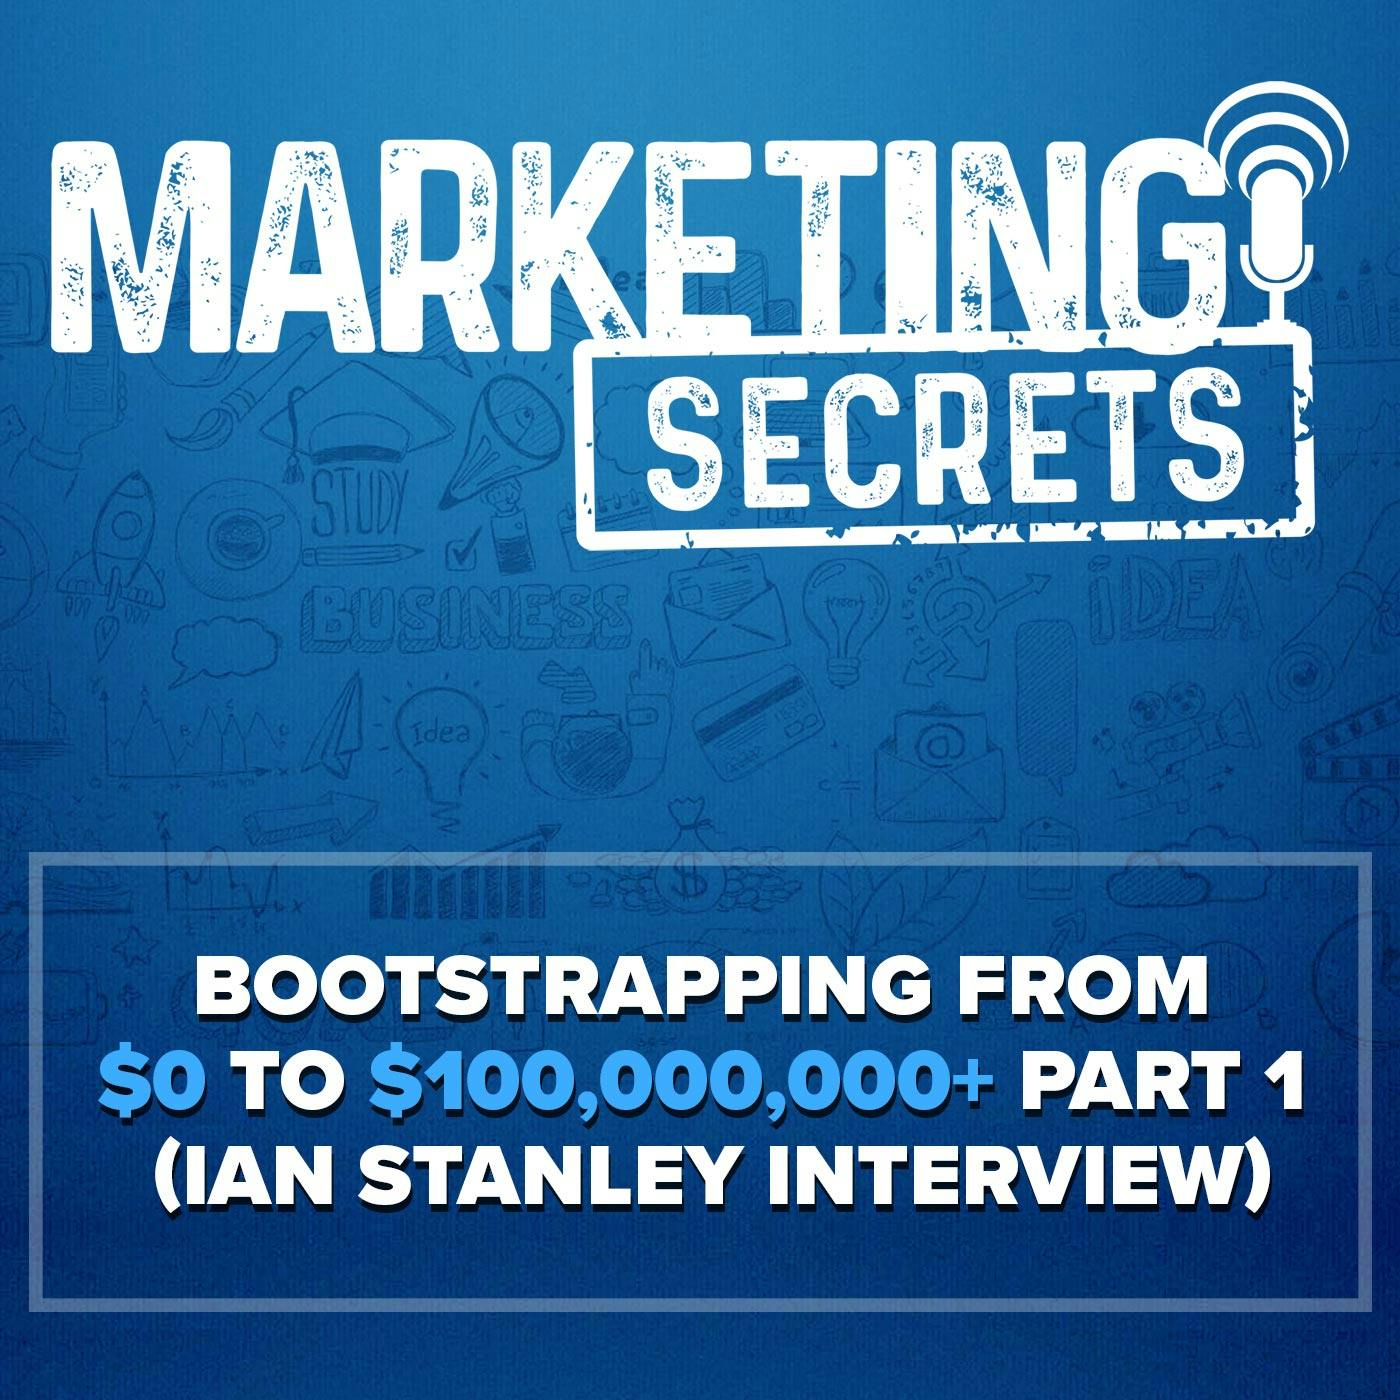 Bootstrapping from $0 to $100,000,000+ Part 1 (Ian Stanley Interview)